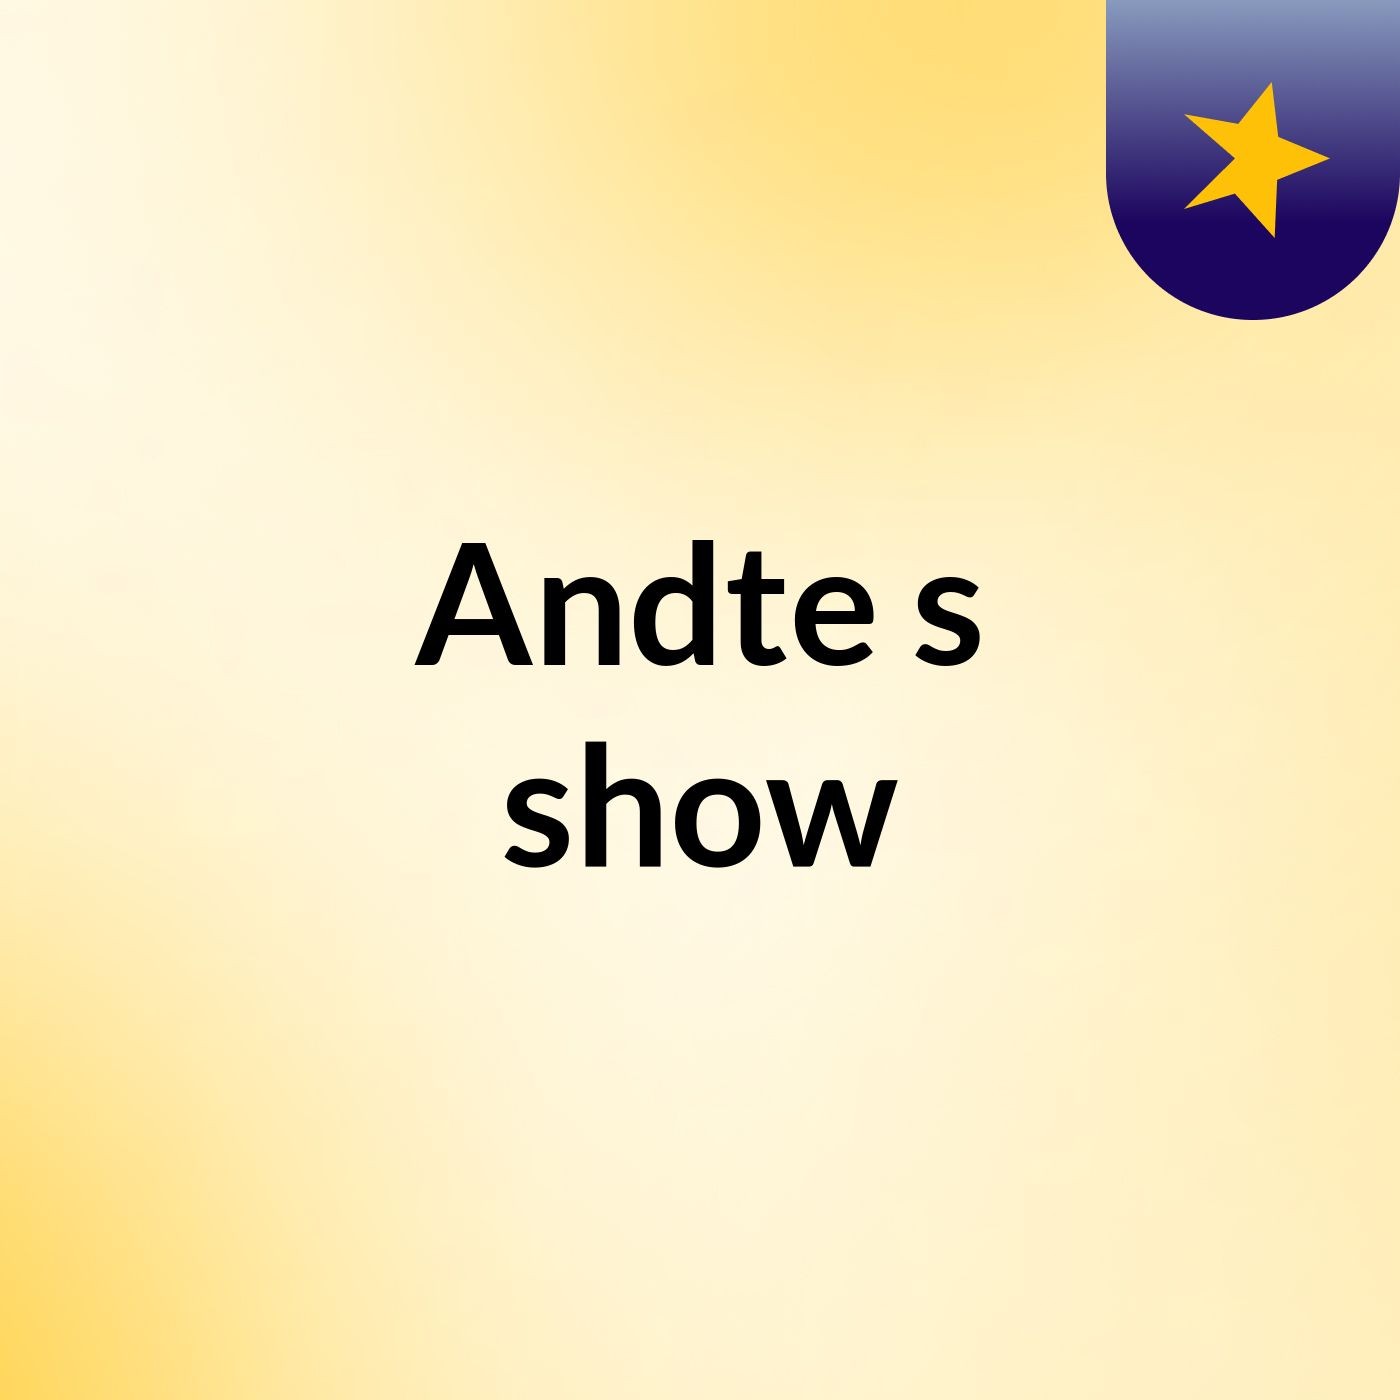 Andte's show